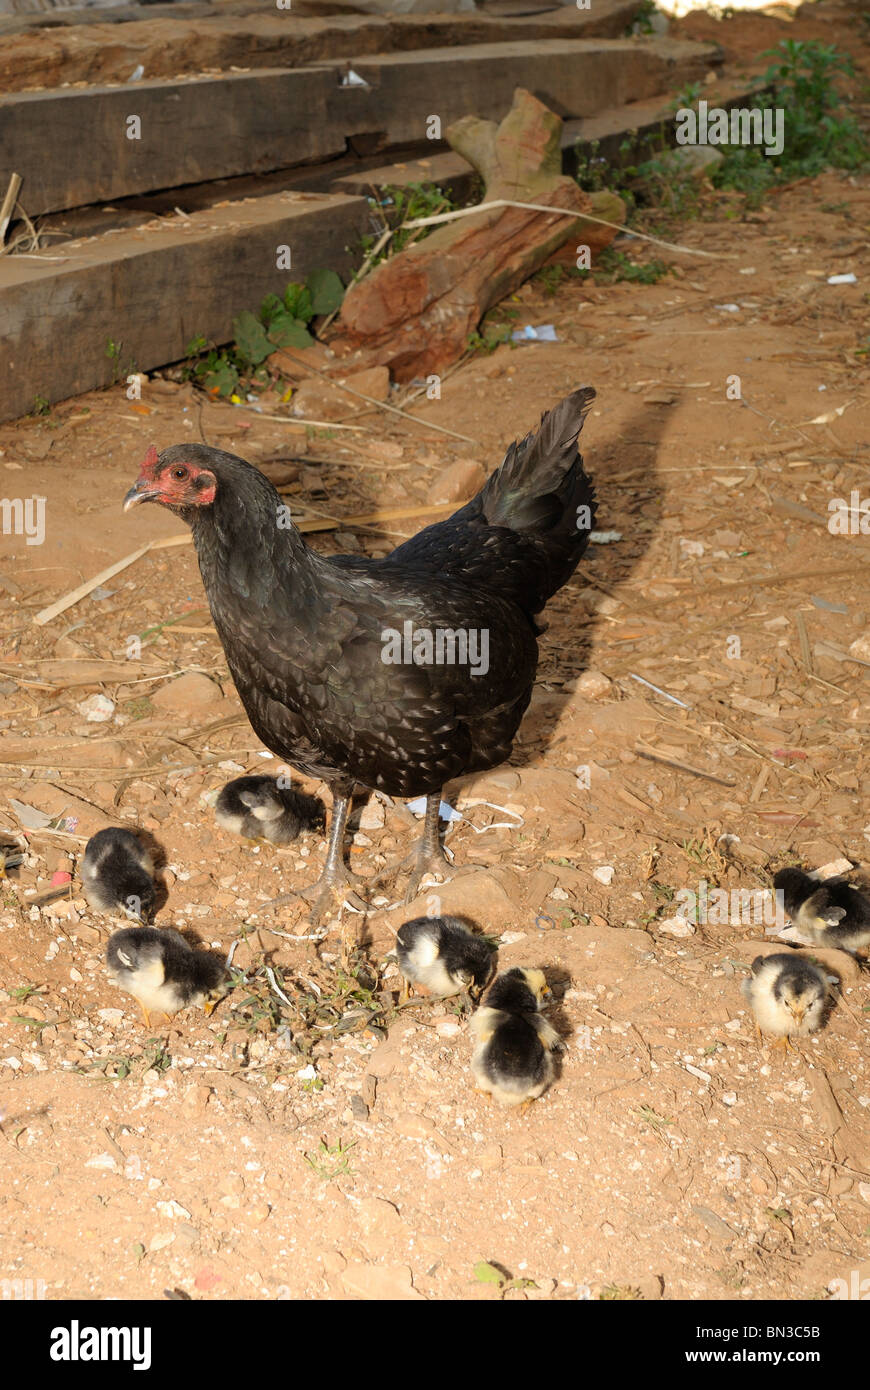 Hen with chicks pecking on dust near a house in Northern Thailand, Asia Stock Photo